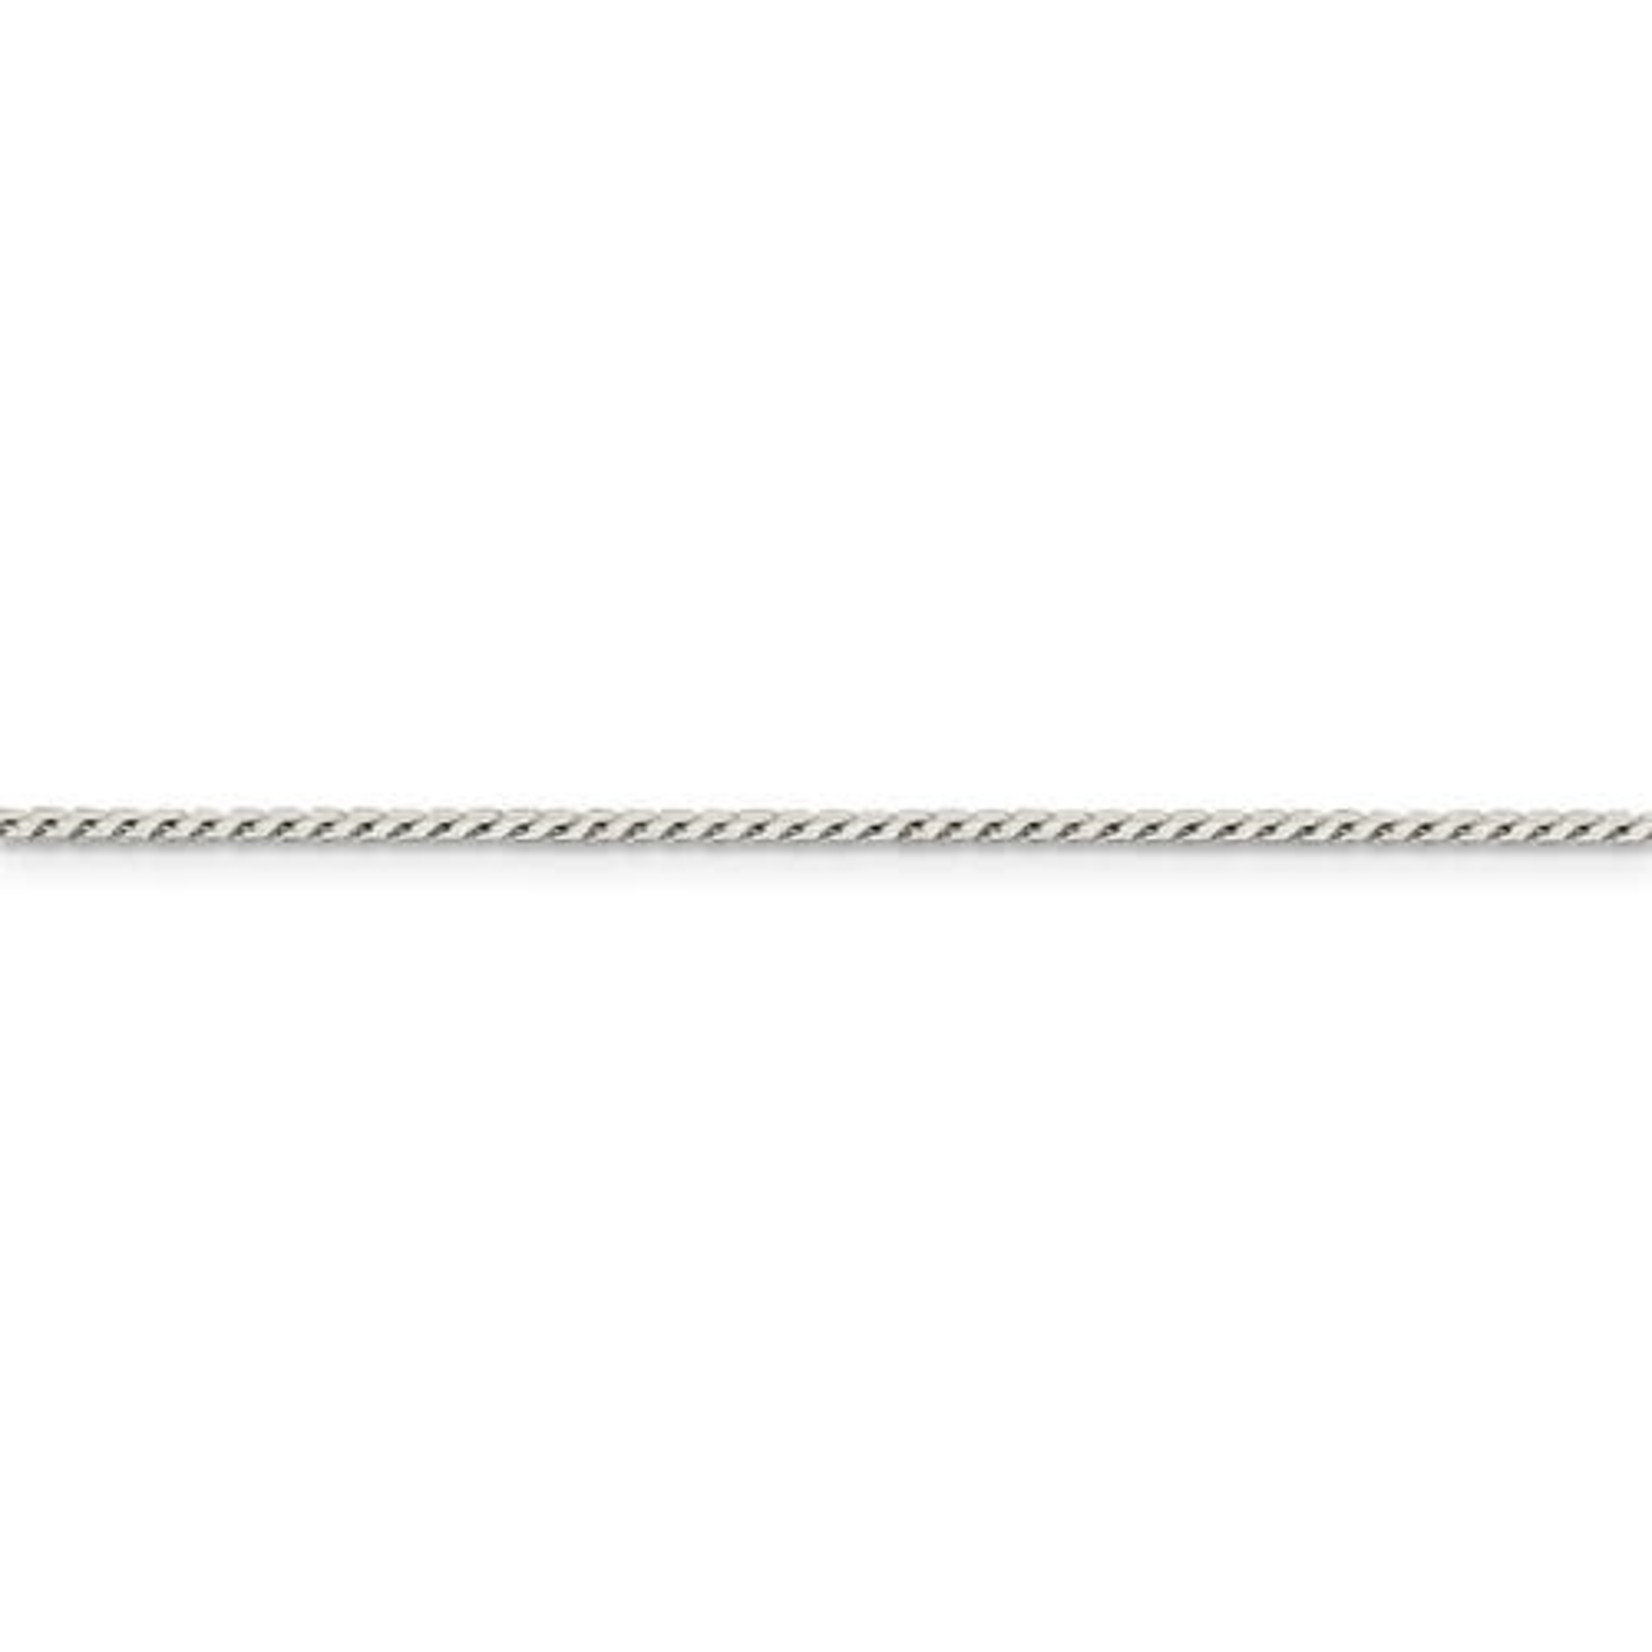 This Is Life Round Franco Sterling Silver Chain - 18"